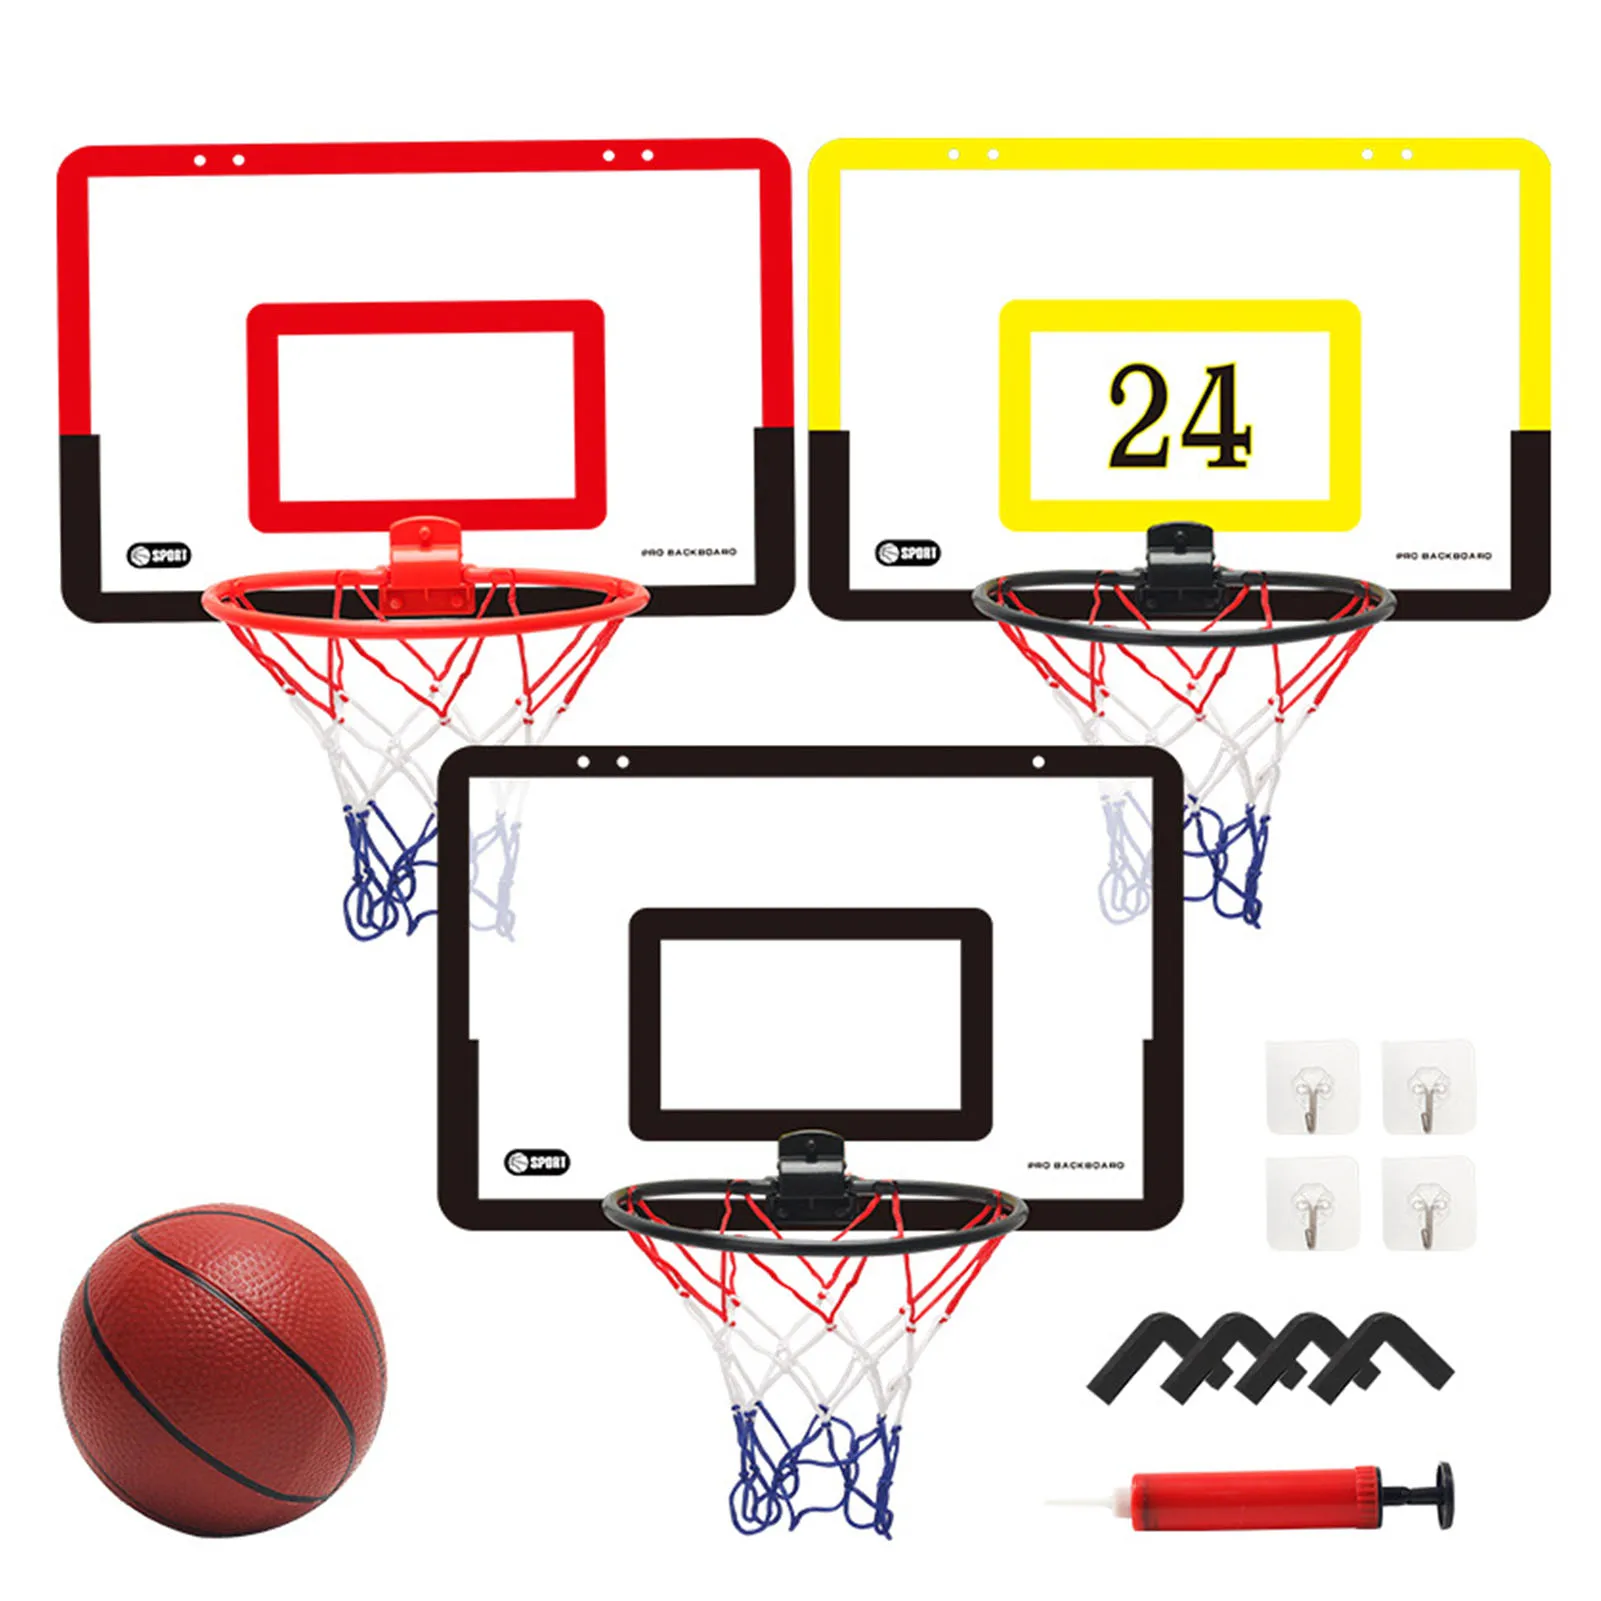 Basketball Hoop For Kids Wall Mount Basketball Hoop Set Punch Free Mini Basketball Board Toys For Door Boys Teens Adults Gifts